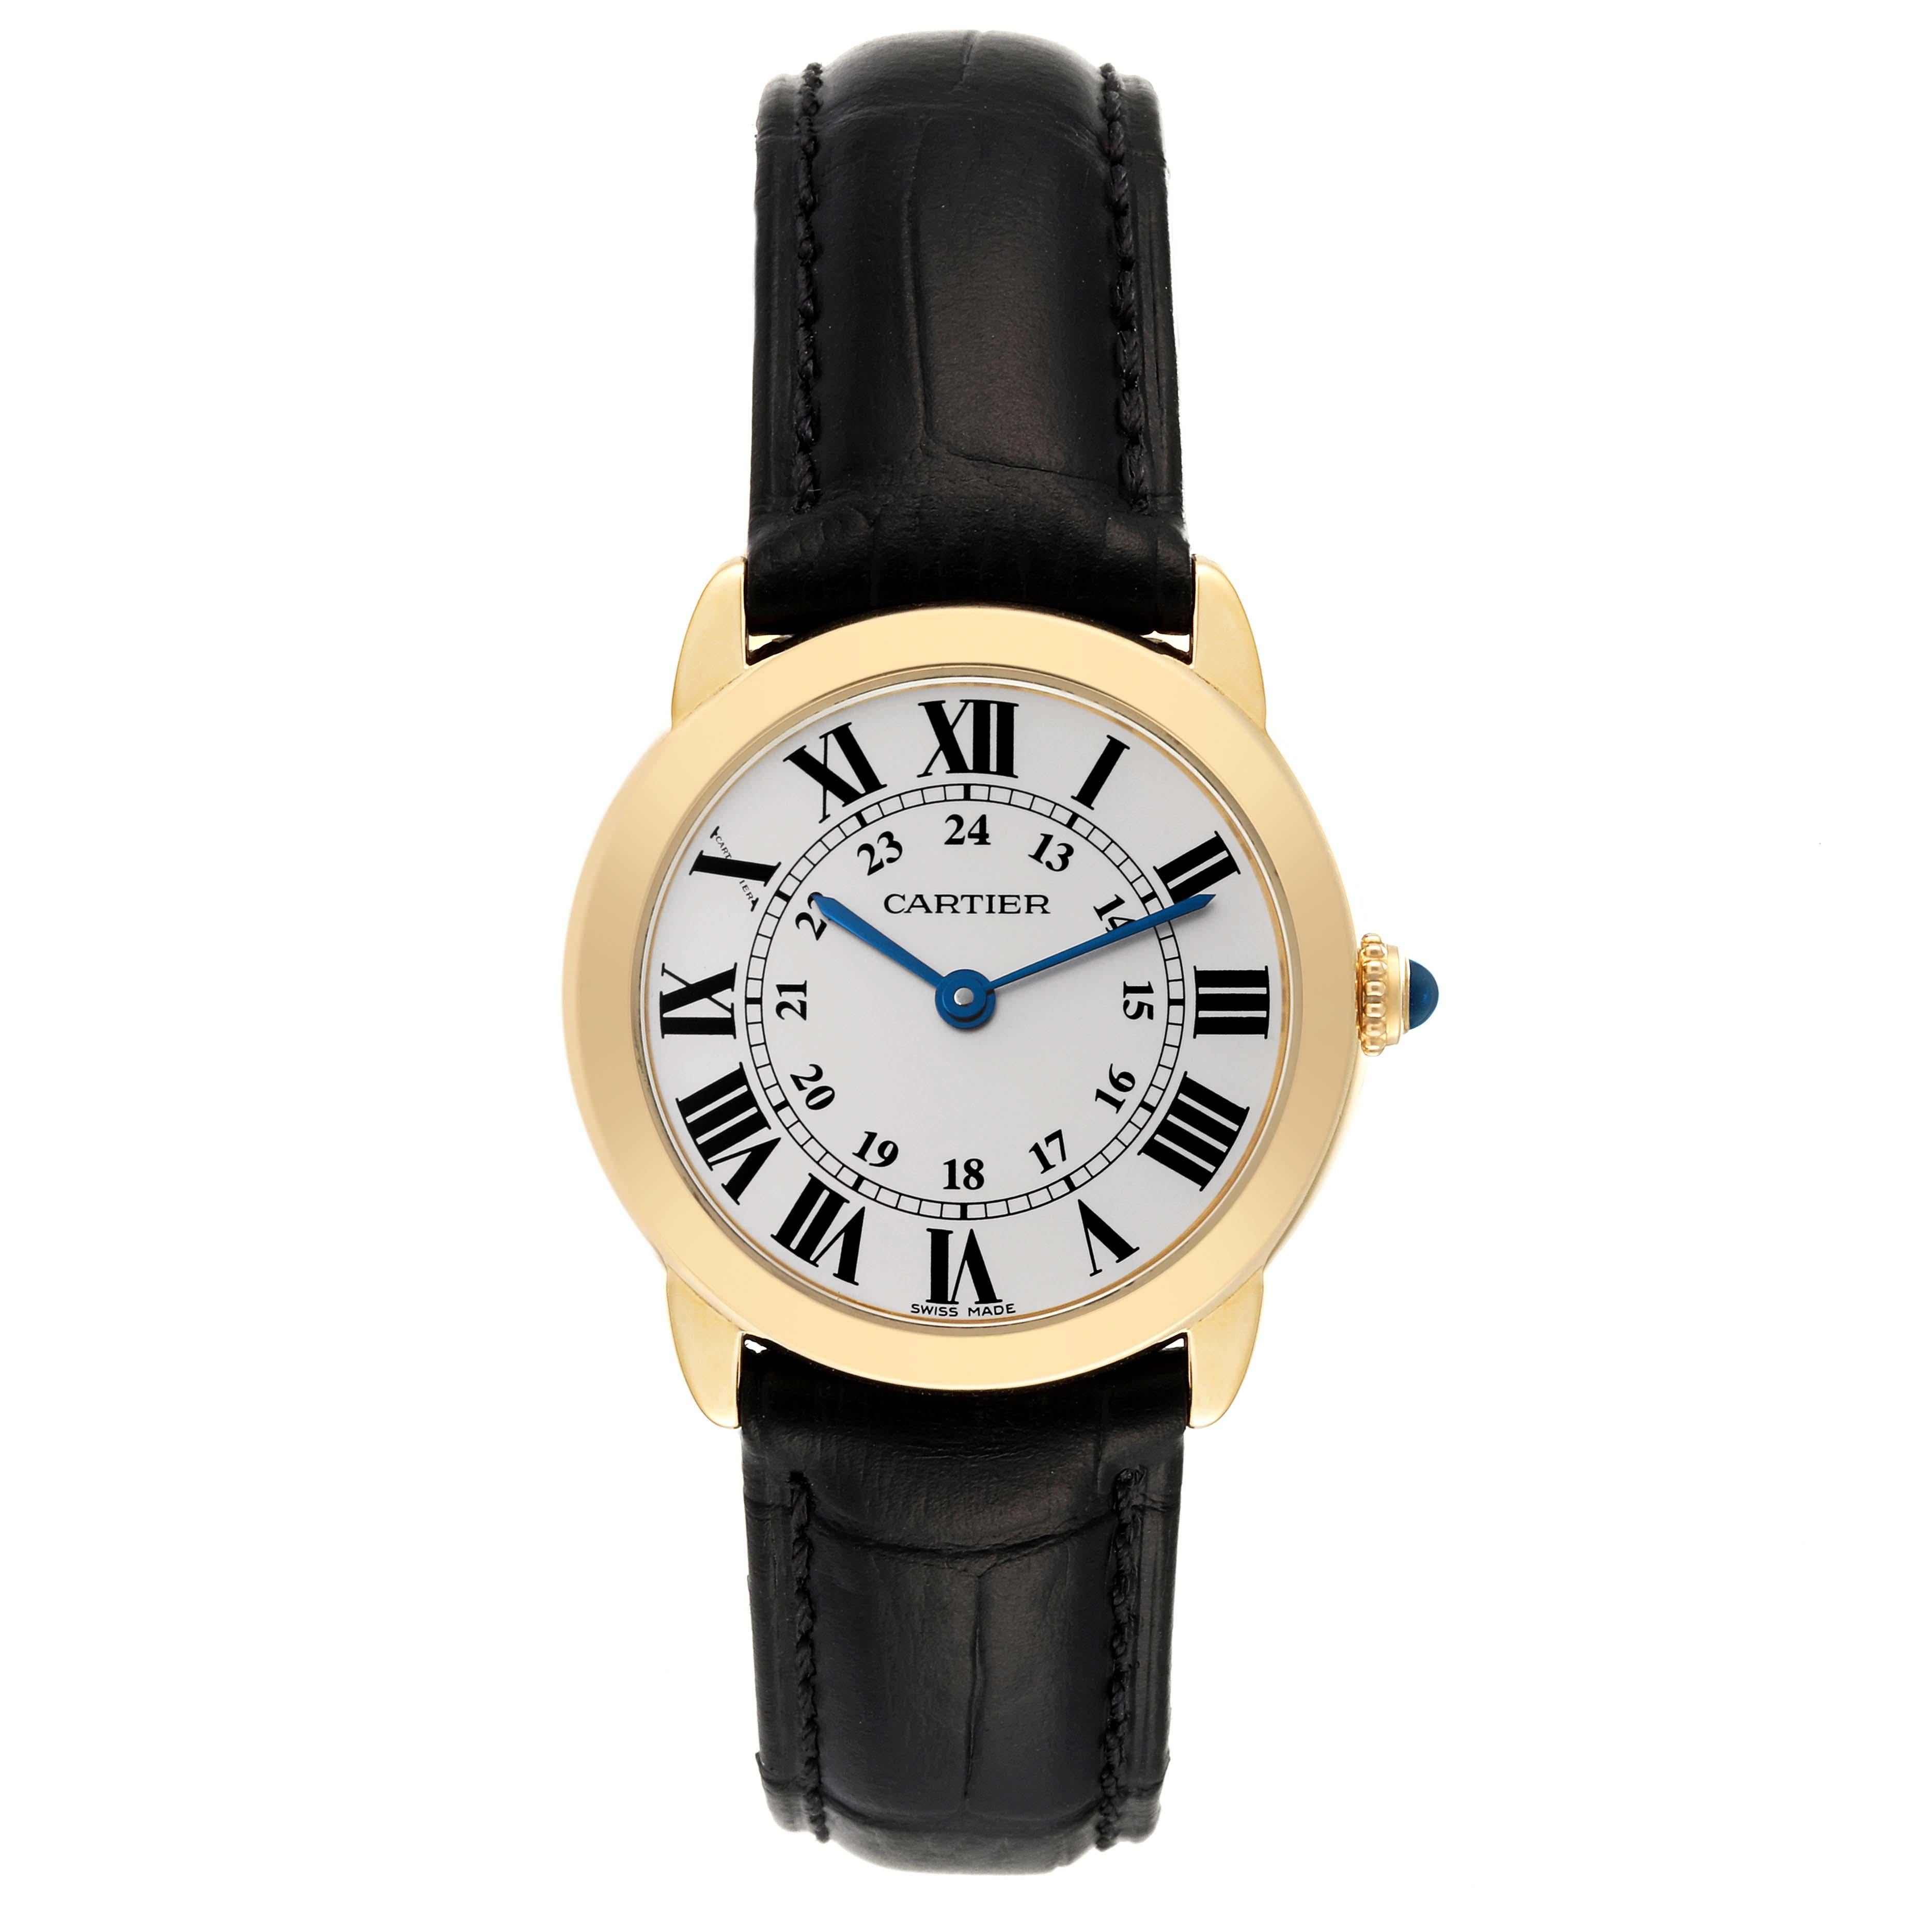 Cartier Ronde Solo Small Yellow Gold Steel Ladies Watch W6700355. Quartz movement. 18K yellow gold case 29.0 mm in diameter. Stainless steel case back. Case thickness 6.35 mm. Circular grained crown set with a blue spinel cabochon. . Scratch